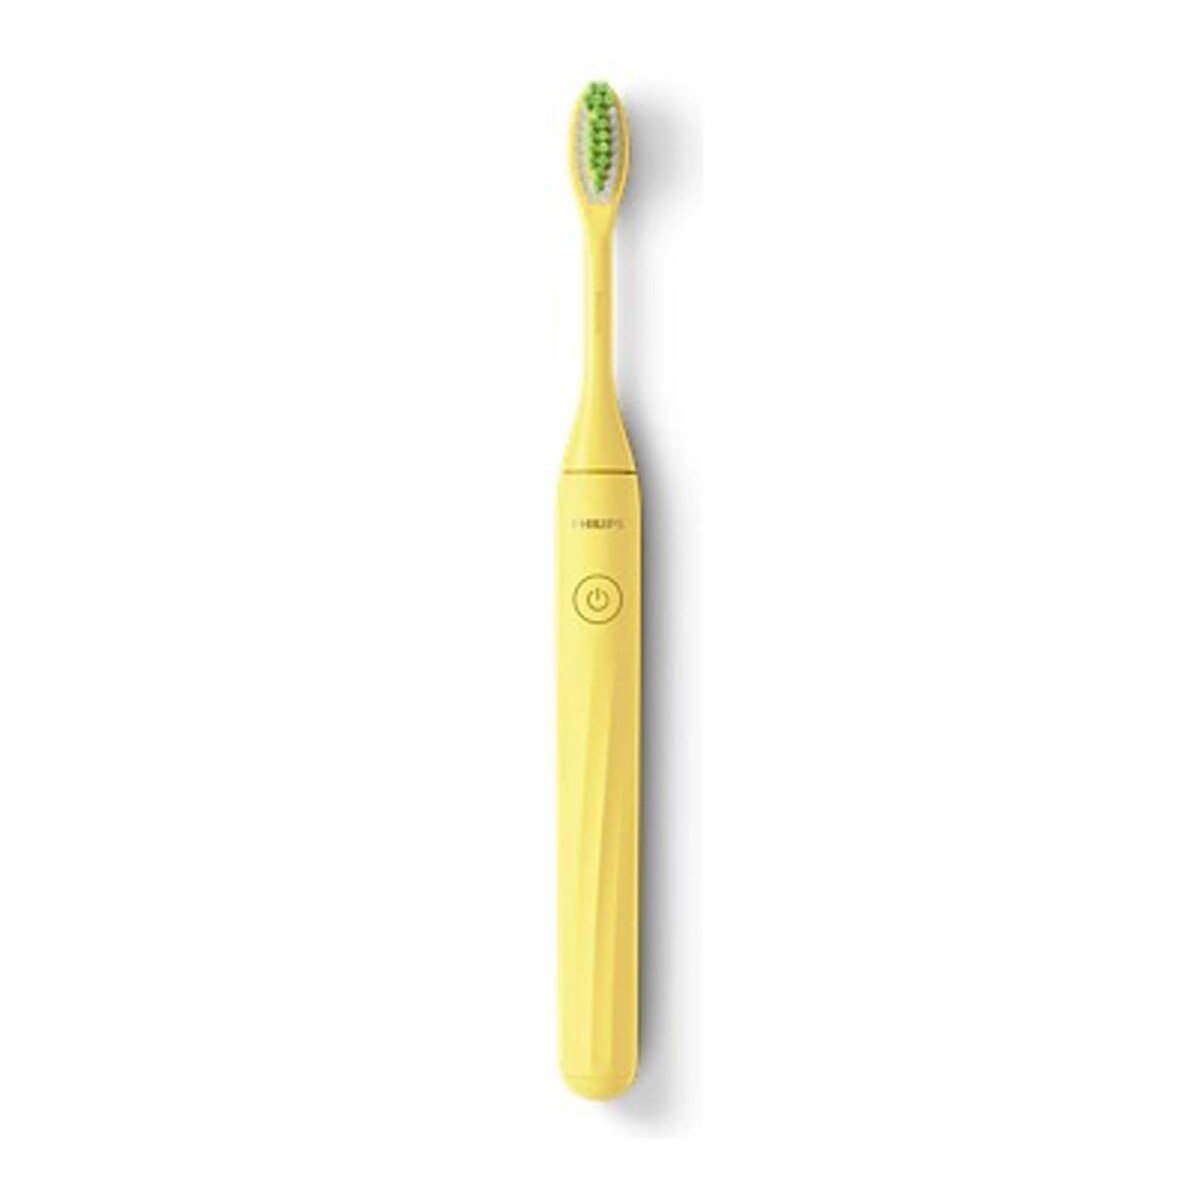 Philips One by Sonicare Battery Toothbrush Mango Yellow HY1100